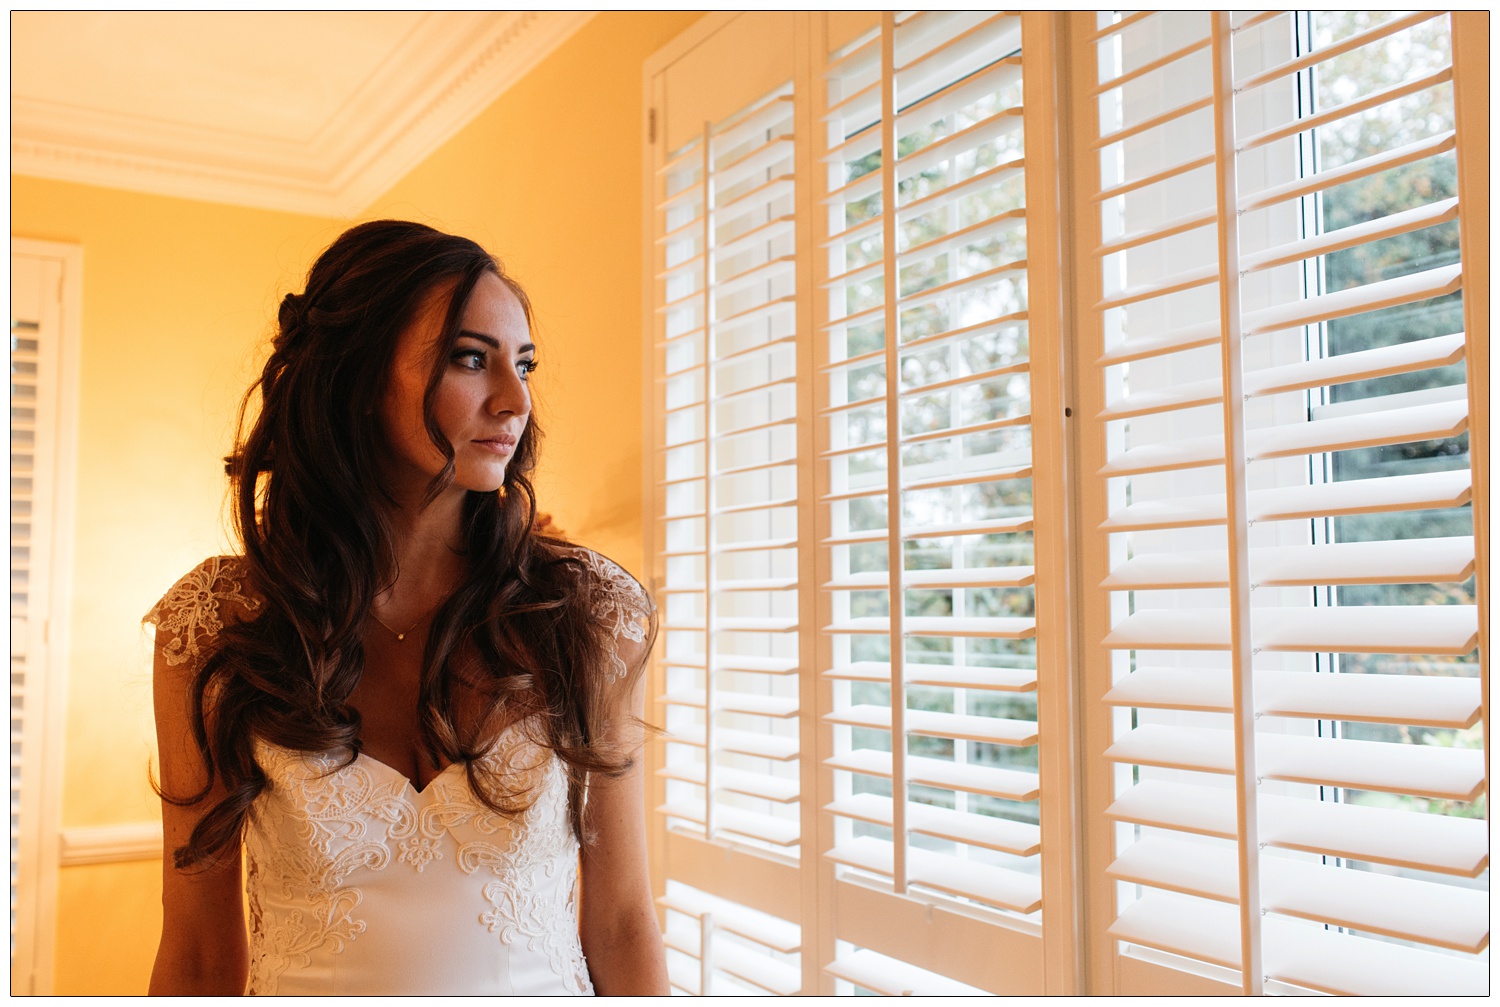 Bride with long dark curled hair, wearing Galia Lahav from Browns bride, looks out of the bedroom shutters.